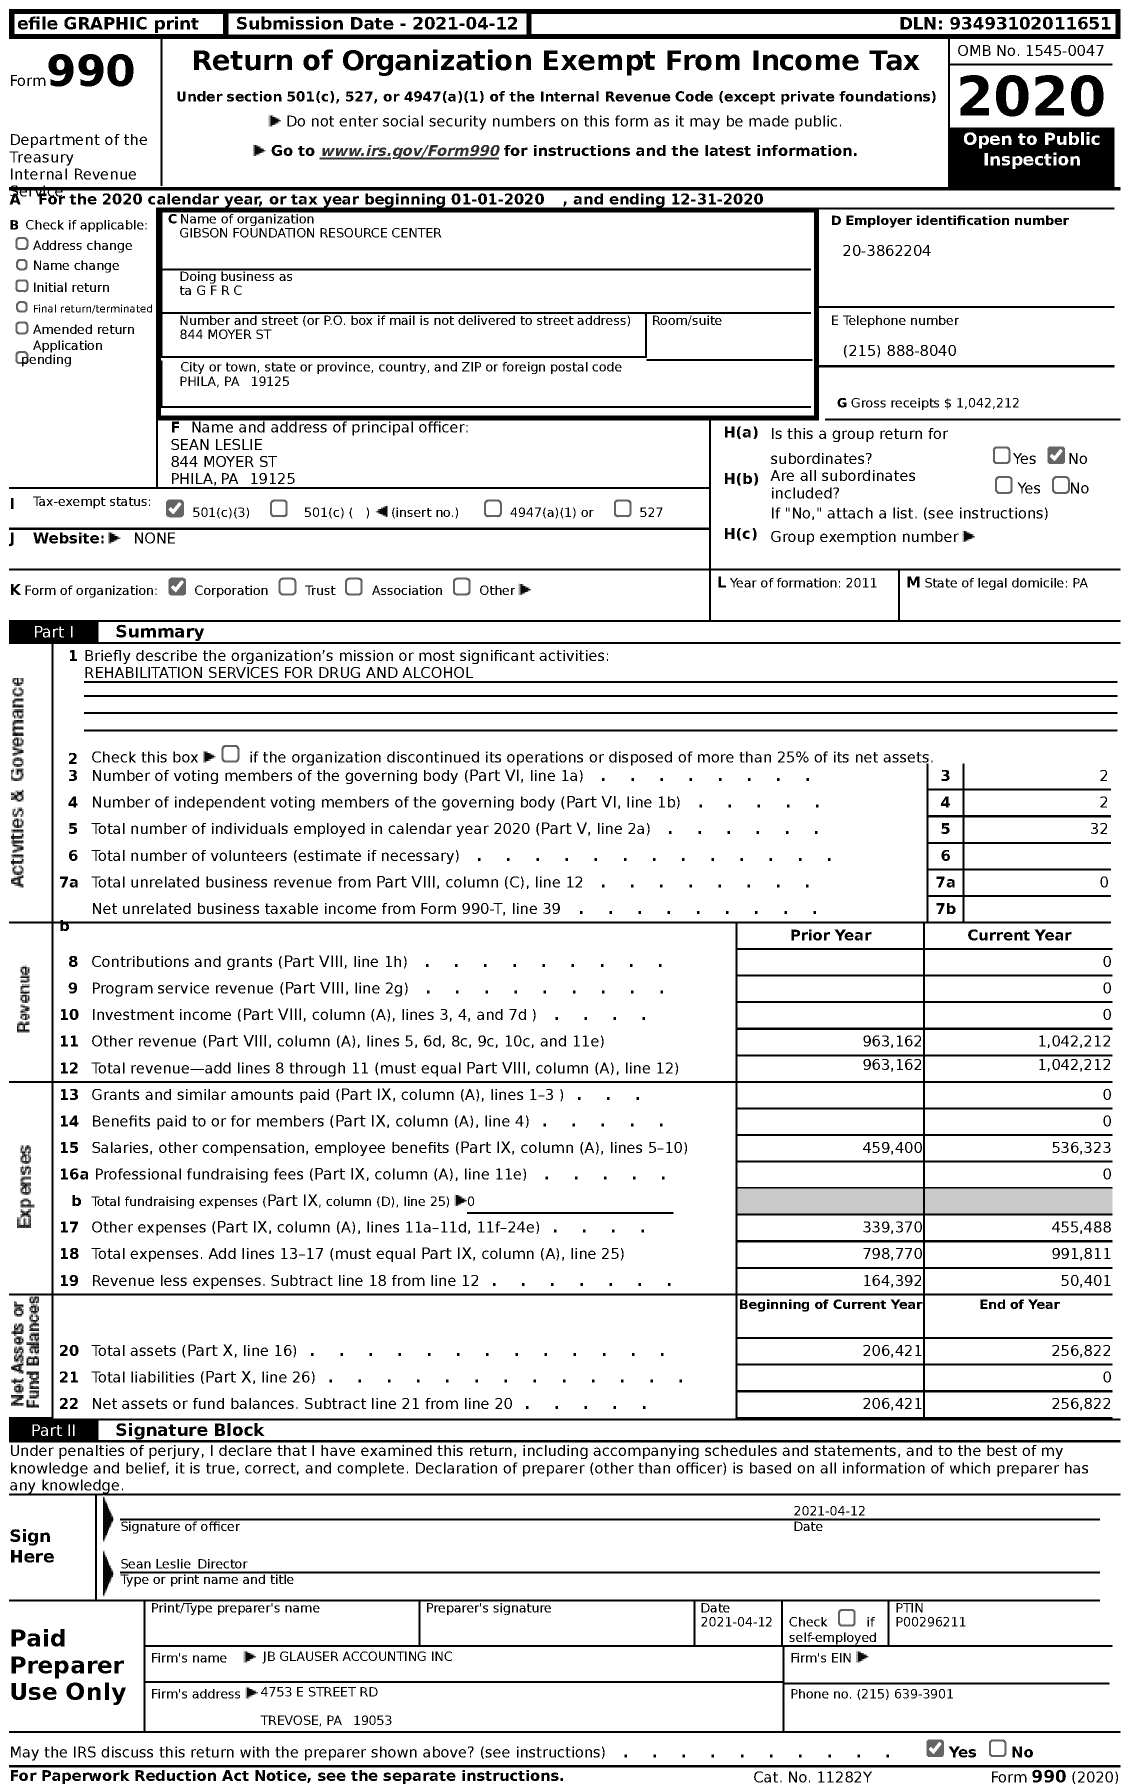 Image of first page of 2020 Form 990 for Ta Gibson Foundation Resource Center